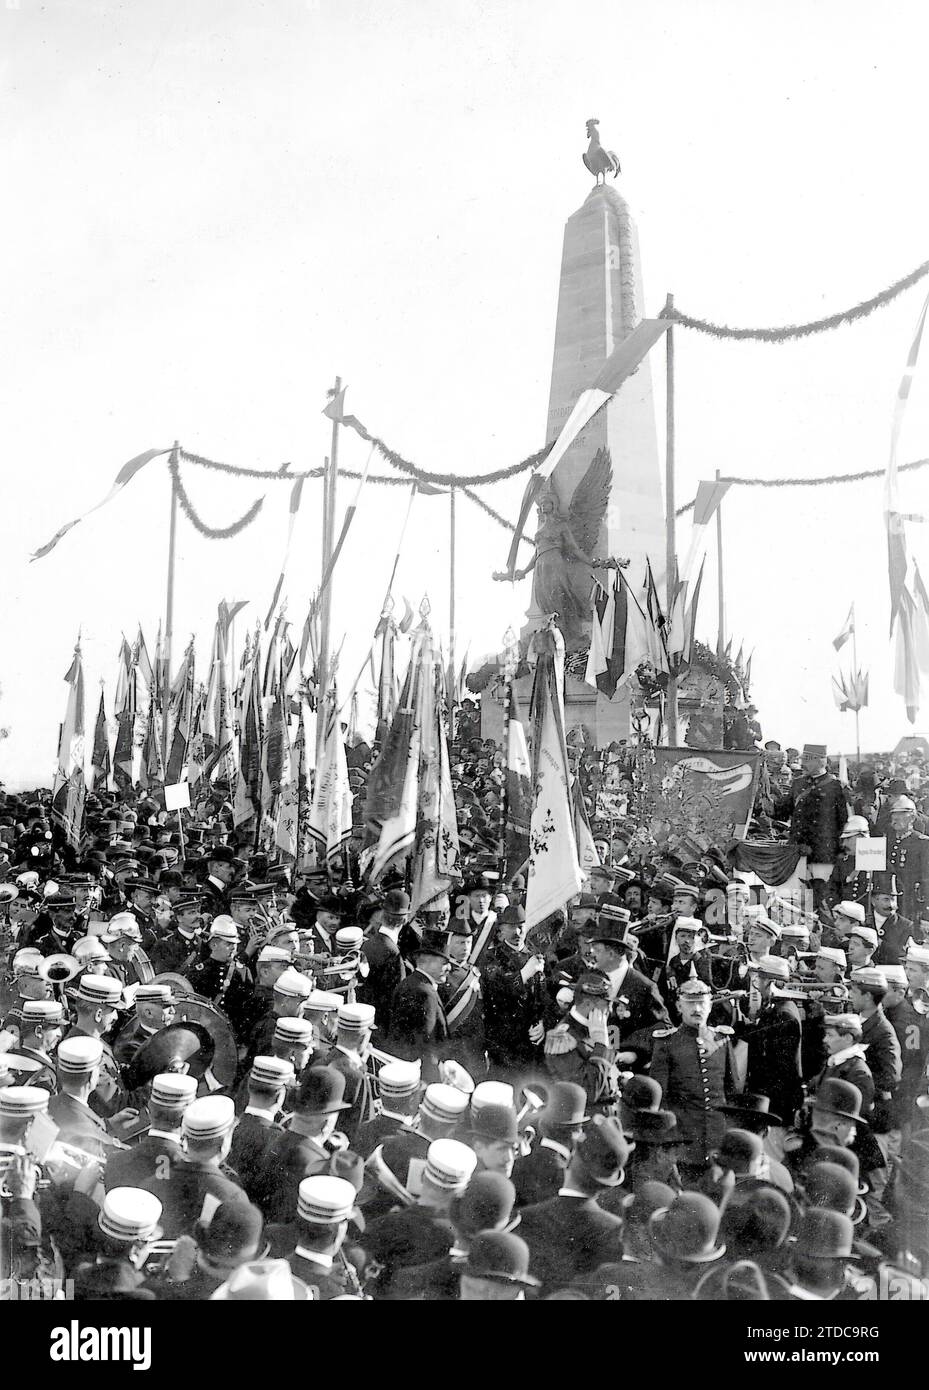 09/30/1909. A French monument in Germany. Solemn inauguration of the monument erected in Wisenburg to the memory of the French soldiers who died for their country during the Franco-German War of 1870 and in proof that the idea of human brotherhood still exists in the German empire. Credit: Album / Archivo ABC / M. Rol Stock Photo